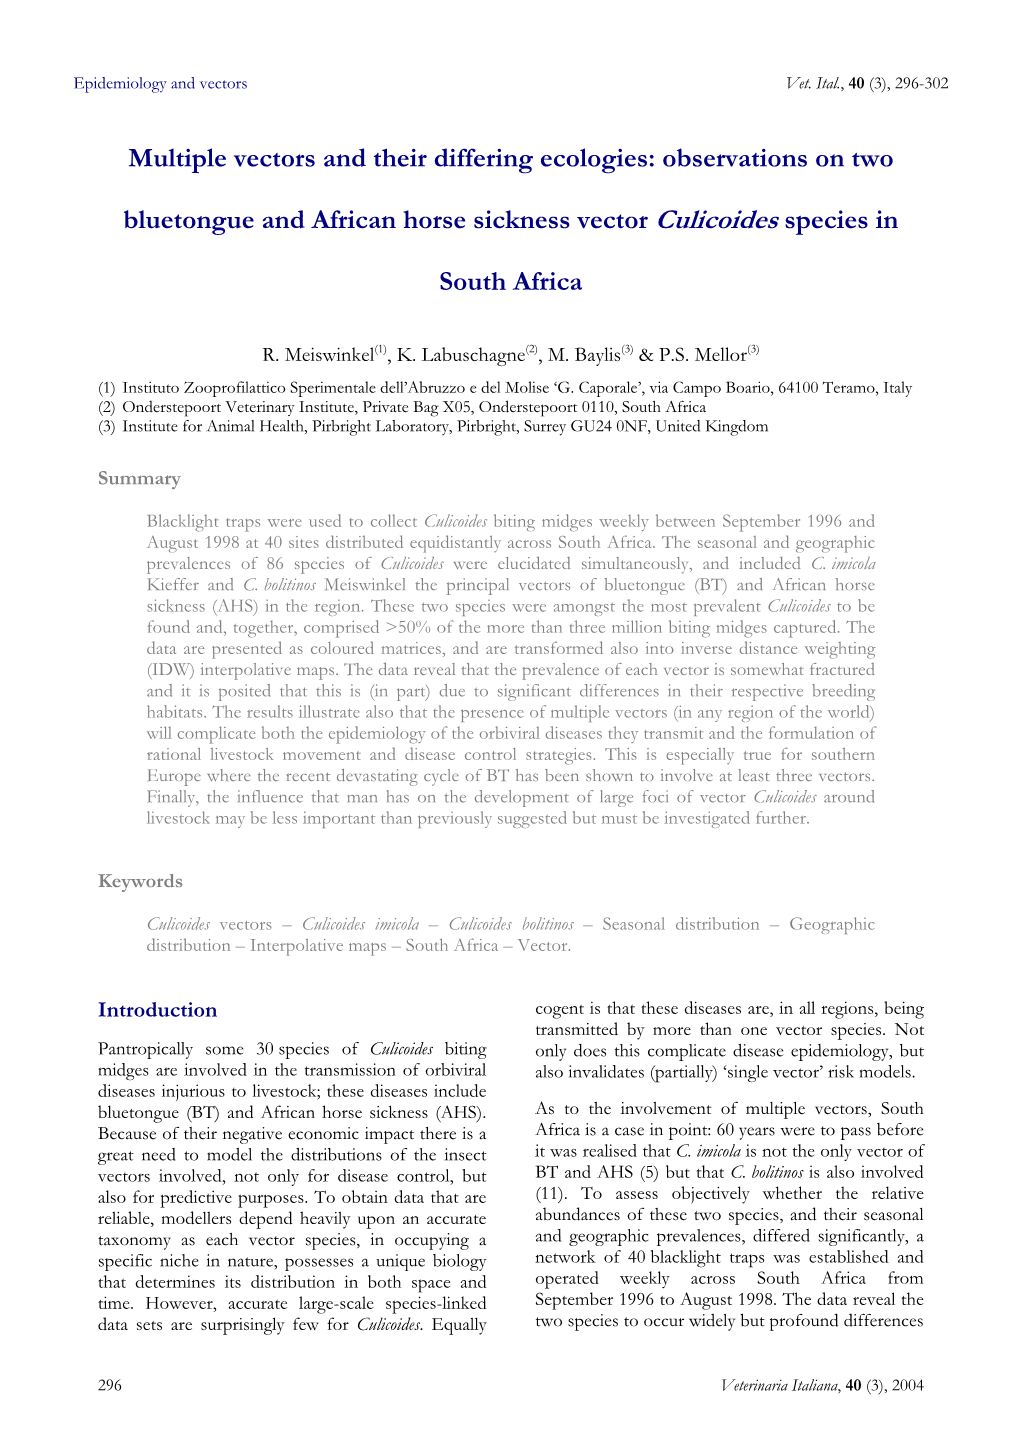 Observations on Two Bluetongue and African Horse Sickness Vector Culicoides Spec